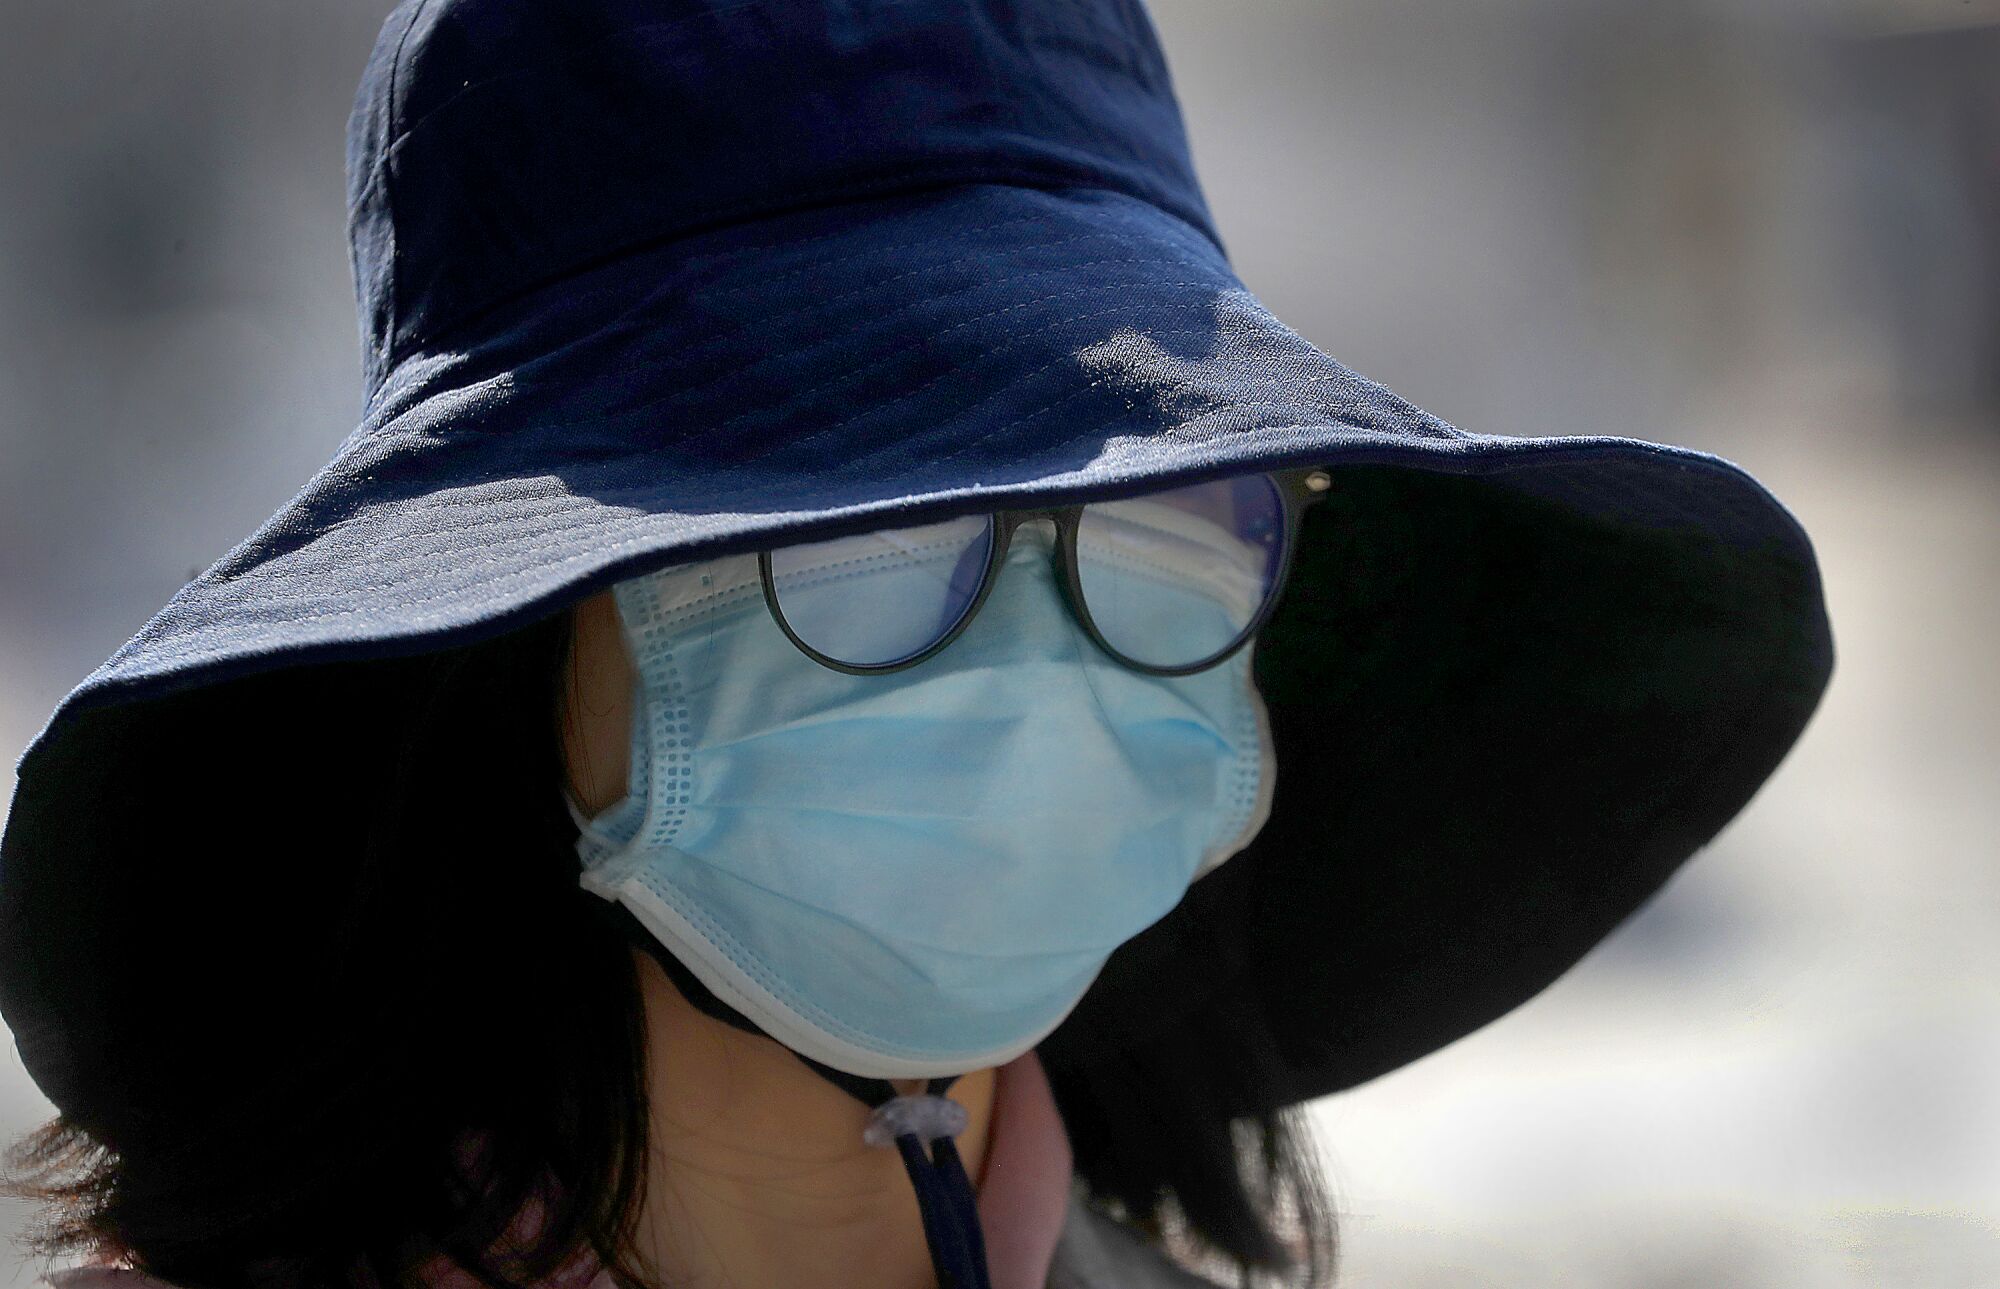 BRITAIN: A surgical mask nearly covers a woman's entire face as she seeks to protect herself from the coronavirus while taking a walk in London.